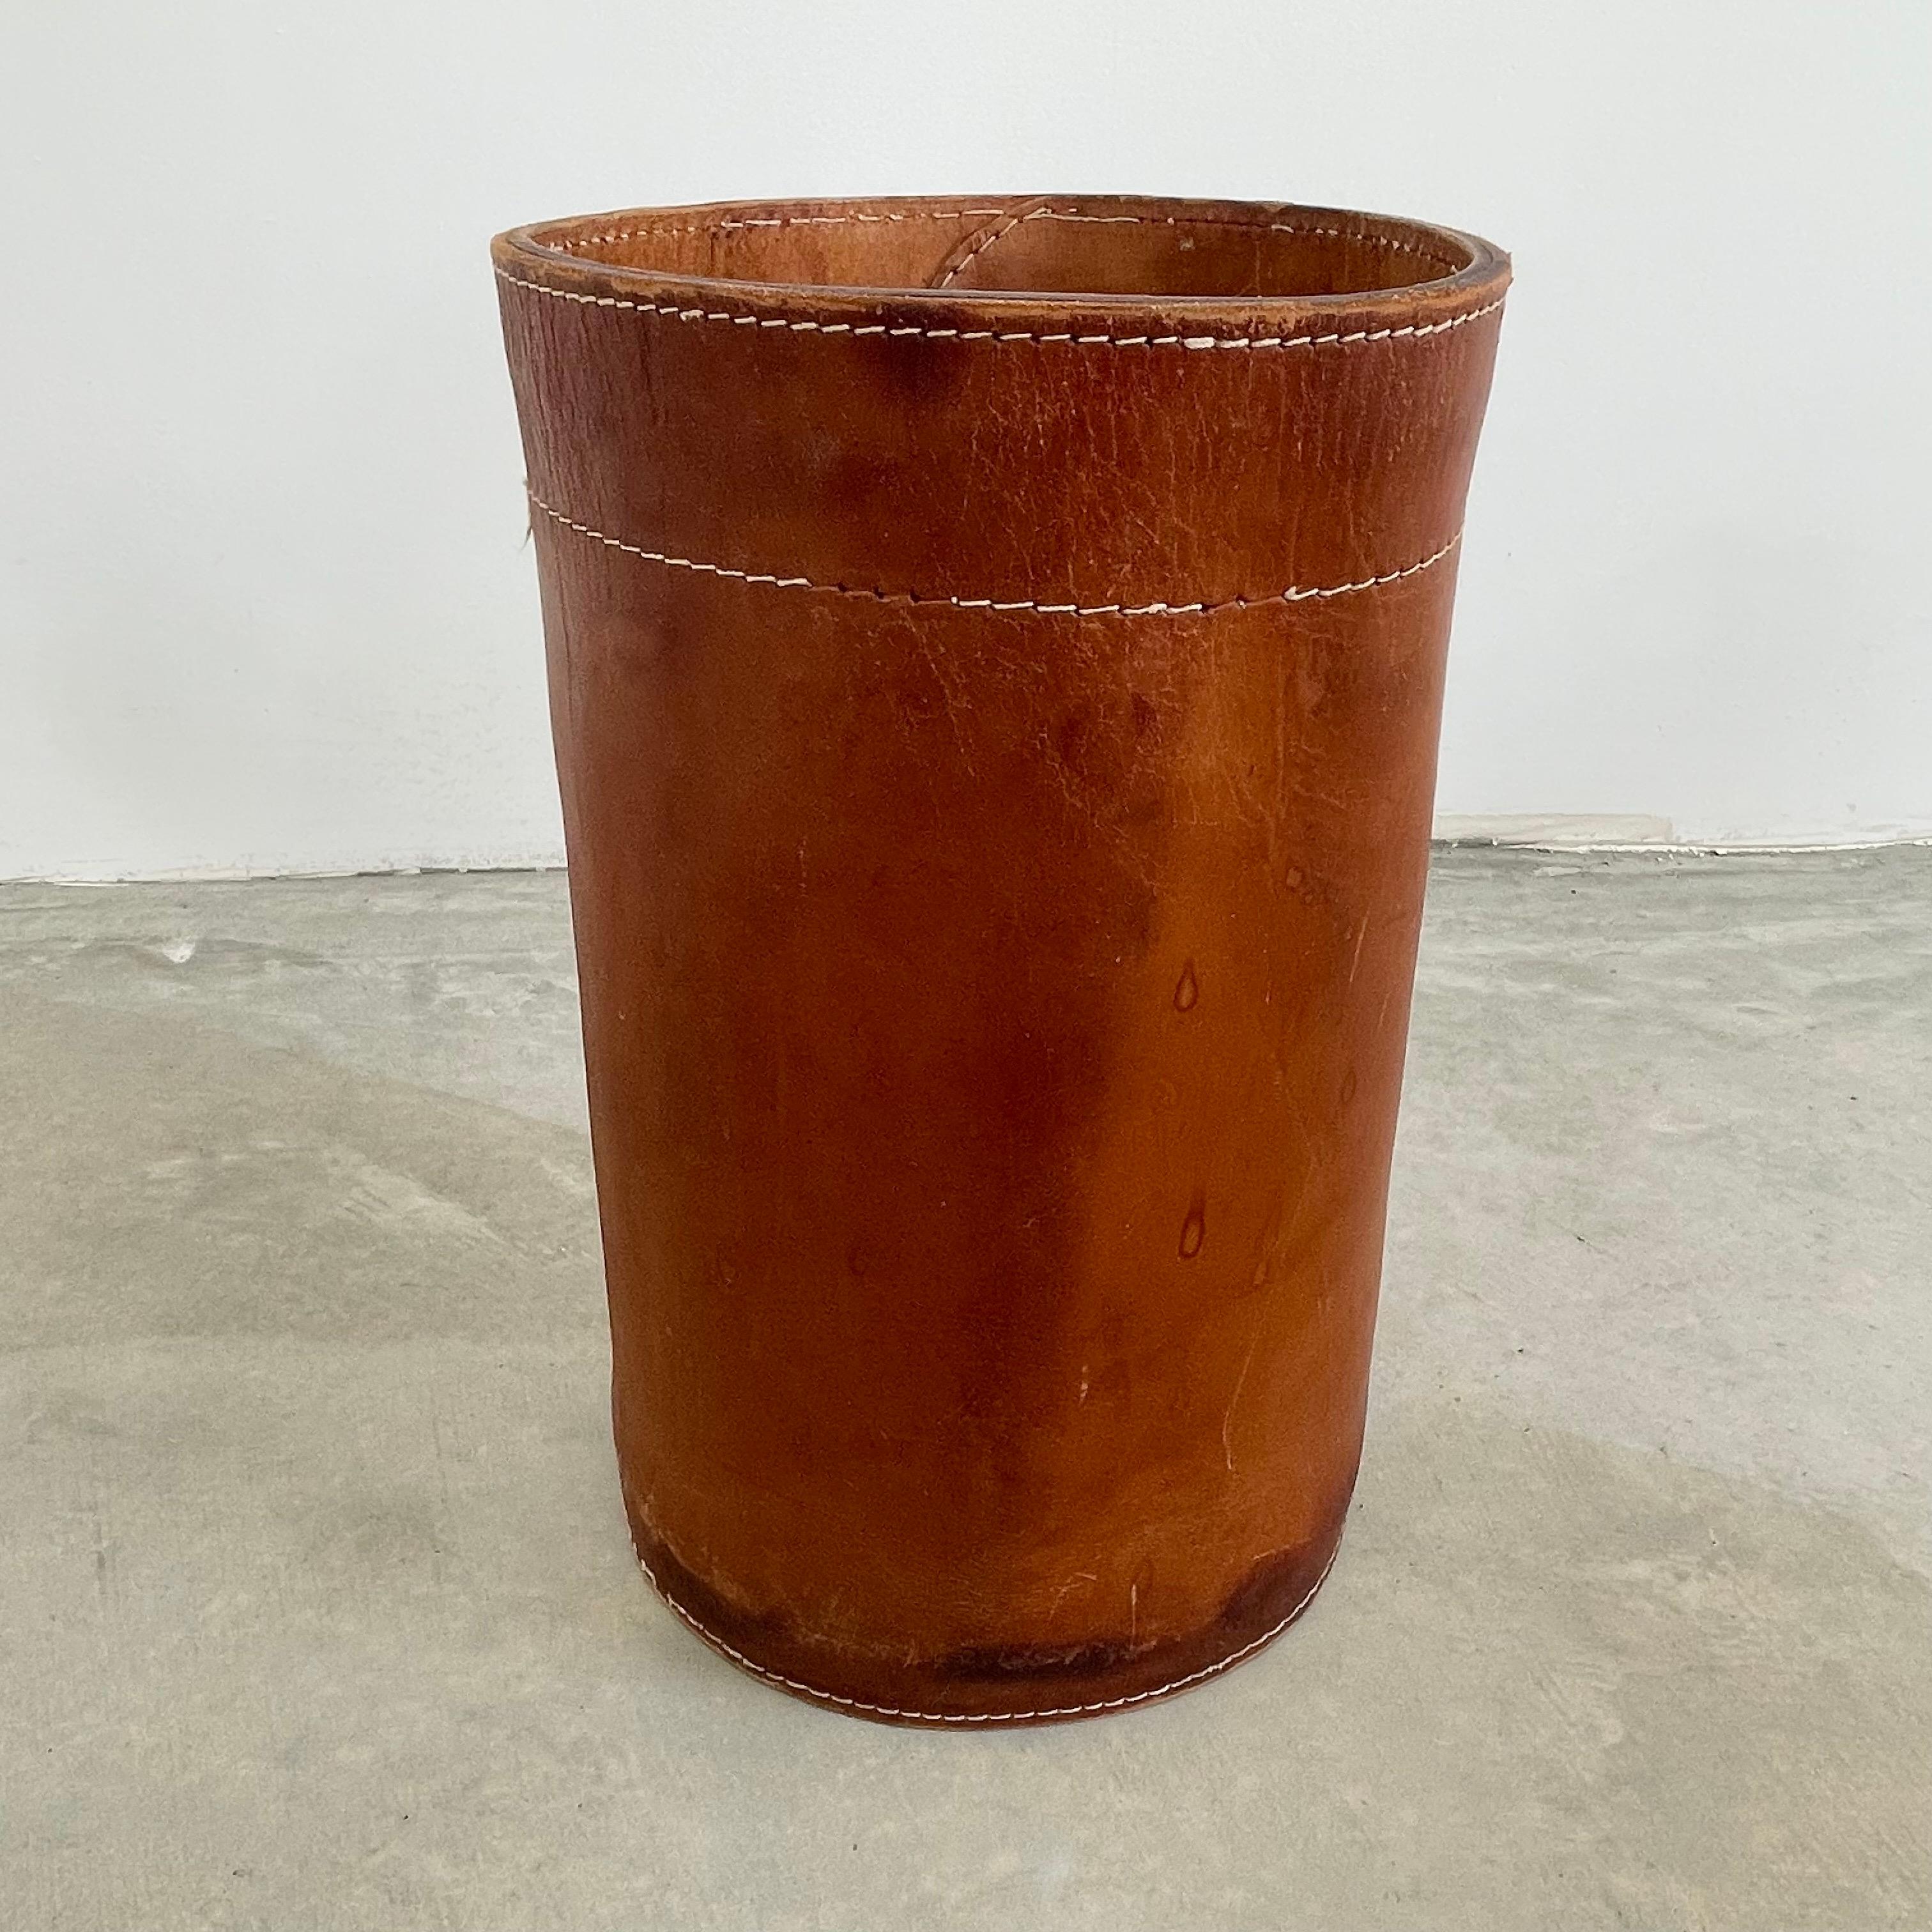 Handsome saddle leather waste bin in the style of Jacques Adnet. Circa 1950s. Great color and age. Inset, removable wooden basket to collect waste. Staining and age as shown. Great patina.